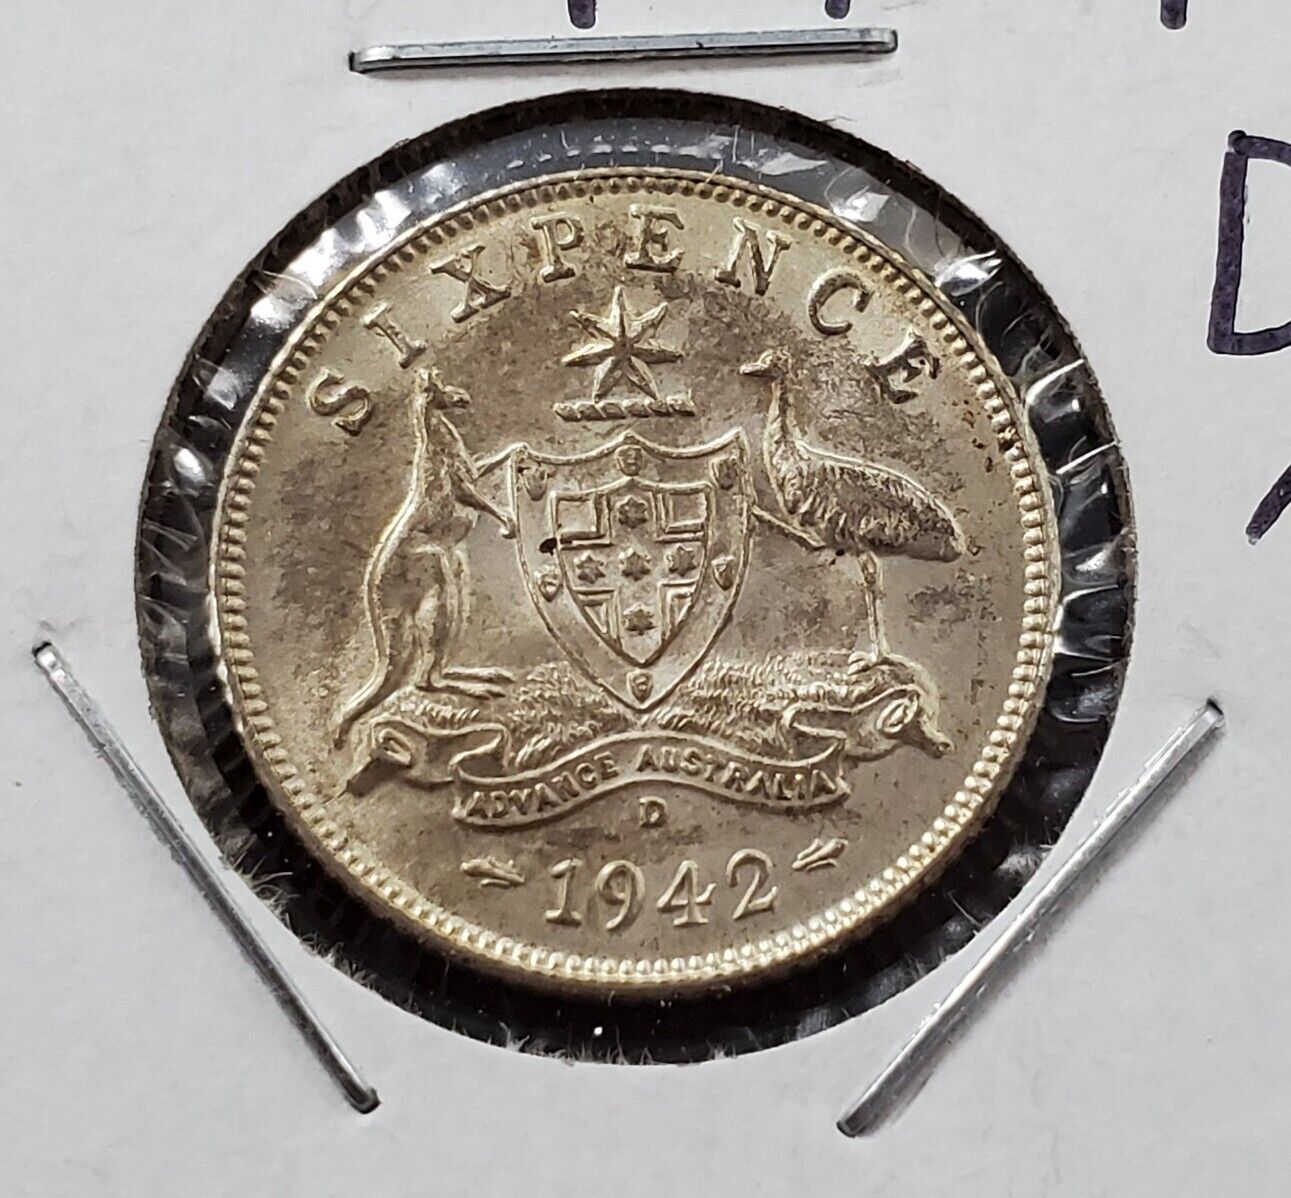 Australia 1942 D 6 Pence Sixpence Six Pence  Silver Coin  BU UNC D/D RPM Variety